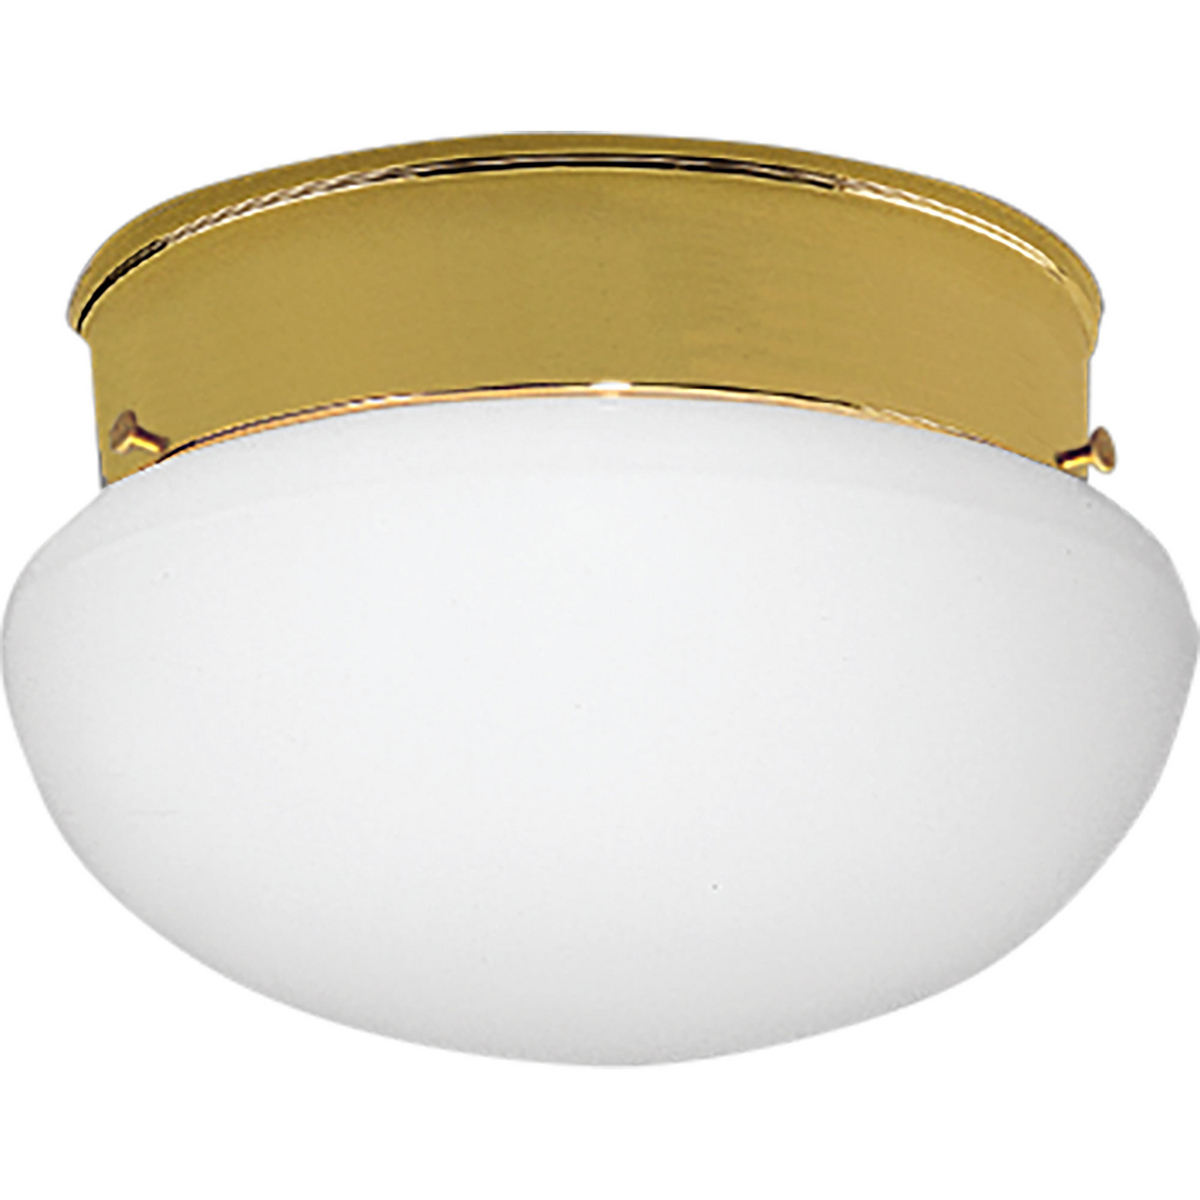 A traditional one-light close-to-ceiling fixture featuring a White glass bowl and a Polished Brass finish. The fixture is ideal in a bathroom setting or hall/foyer.